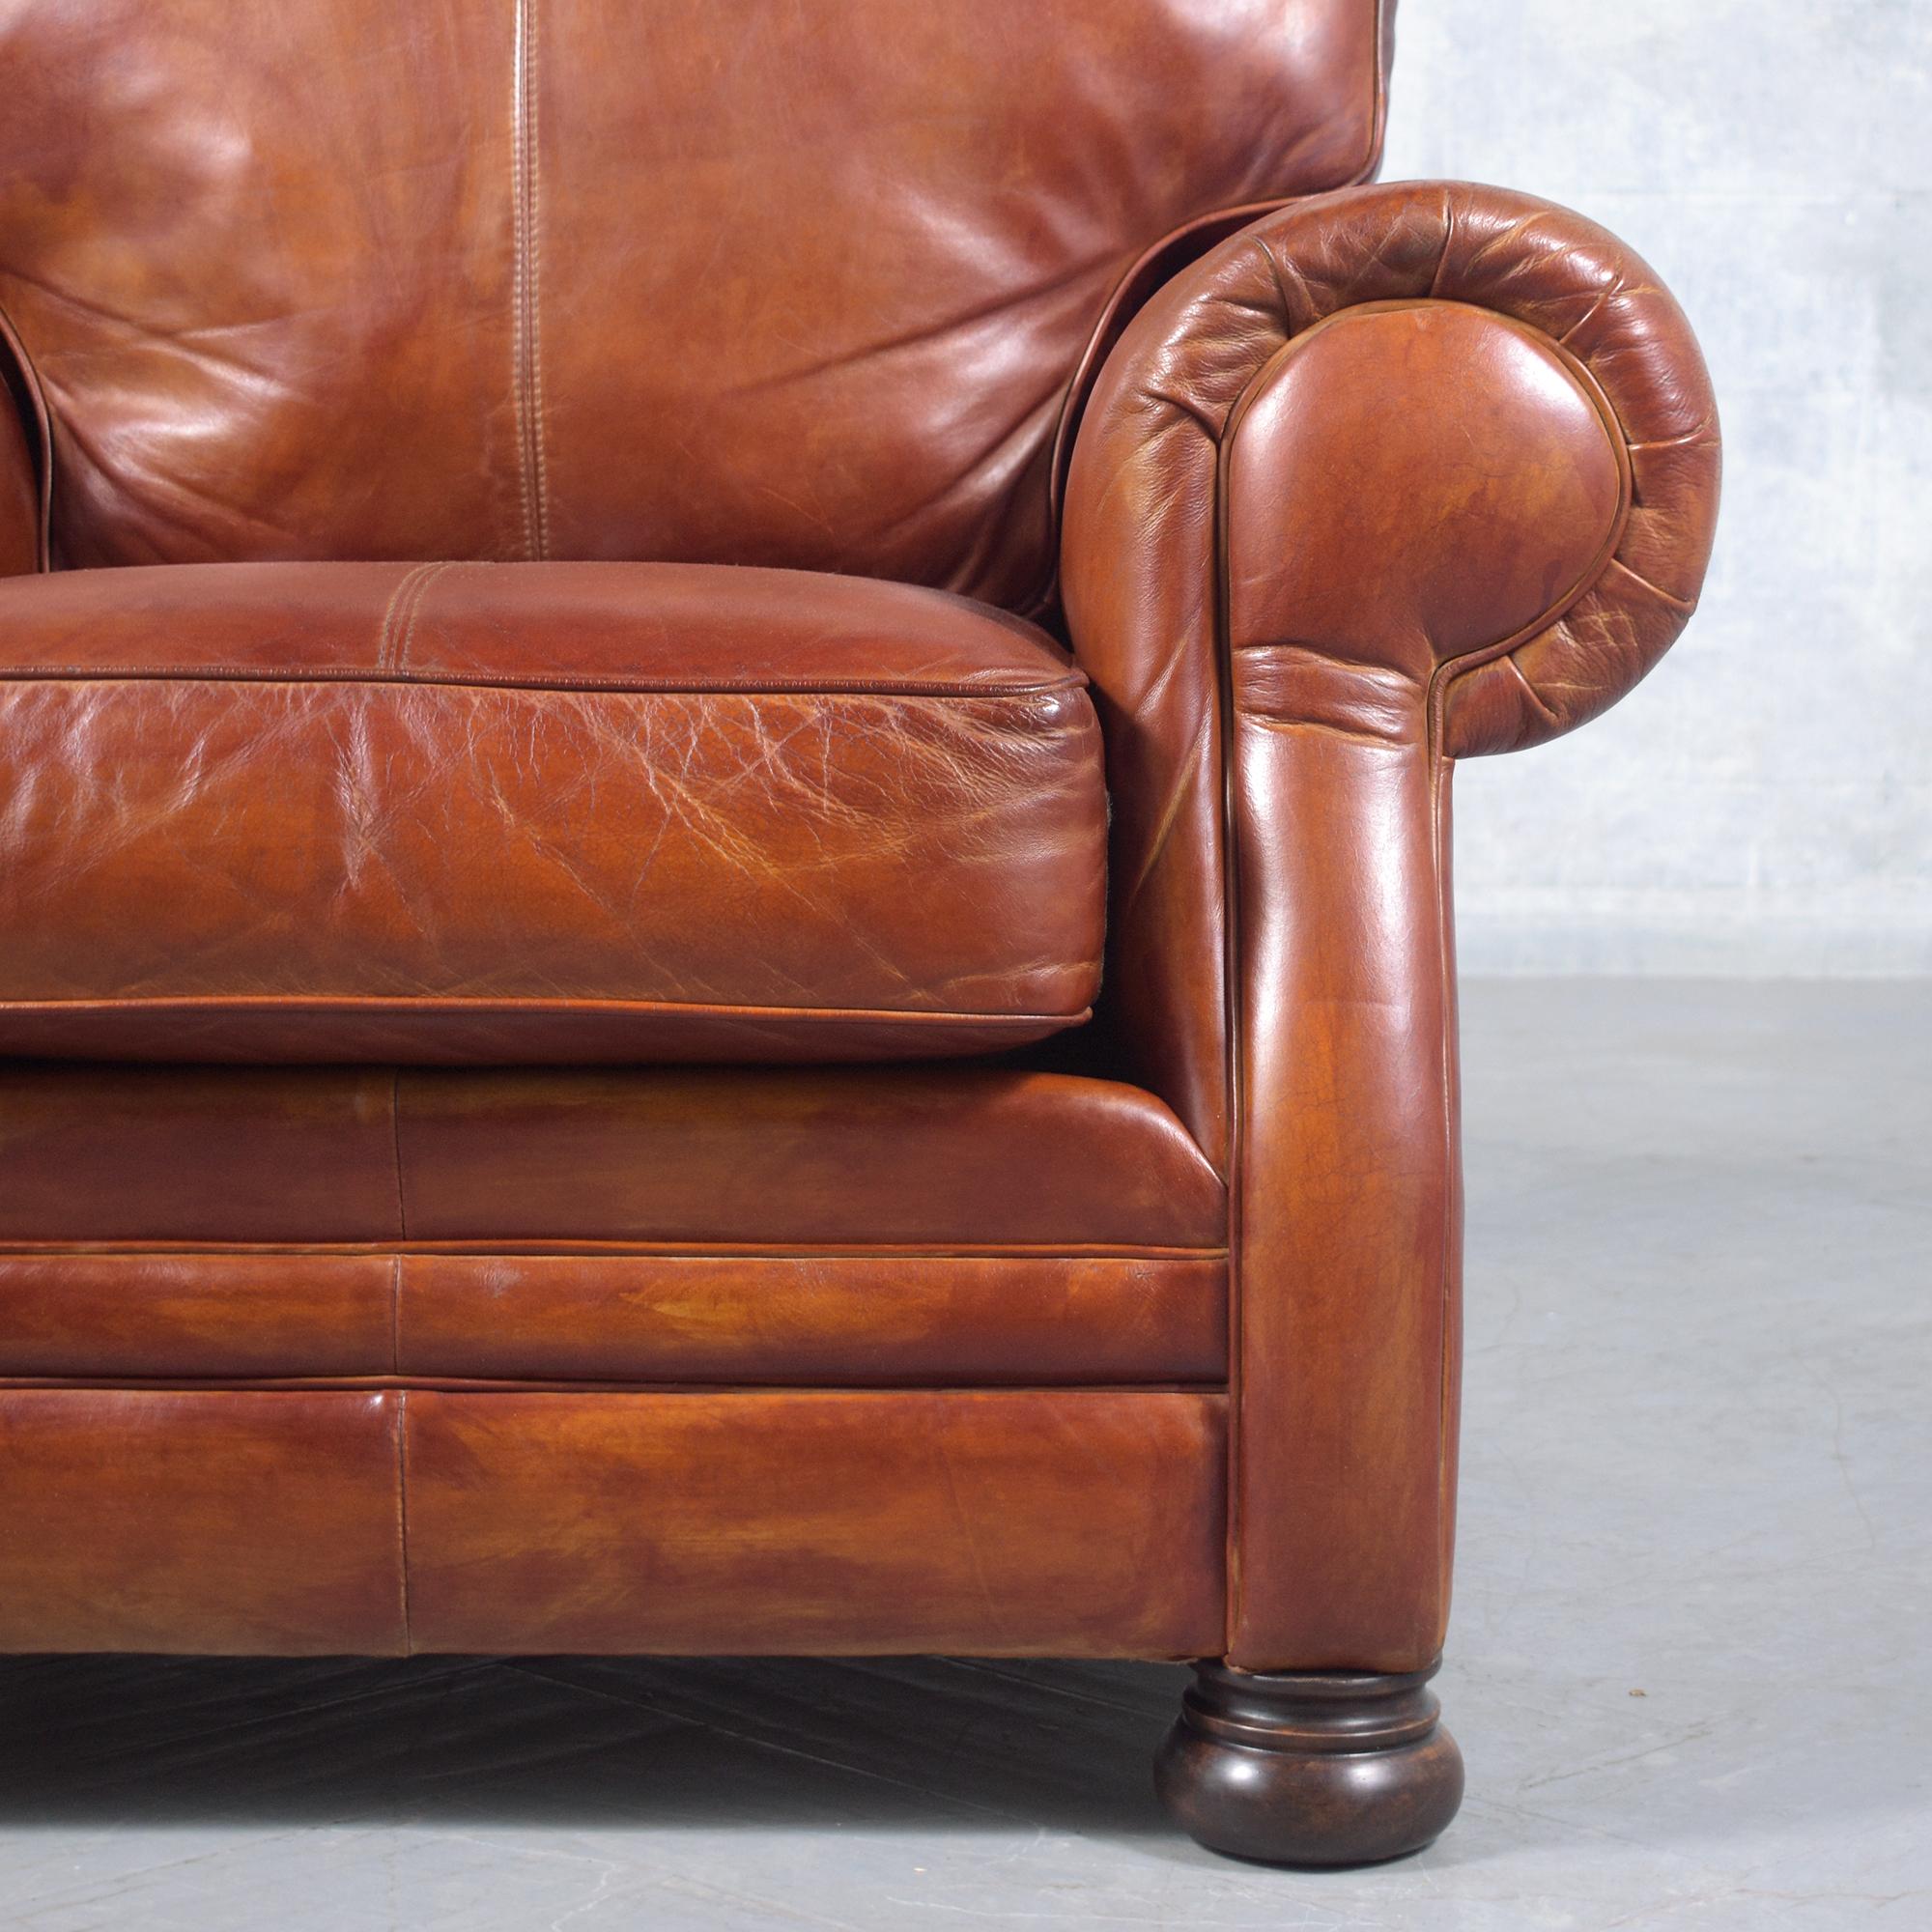 Late 20th Century Restored Vintage Leather Armchairs in Cognac Brown with Carved Bun Legs For Sale